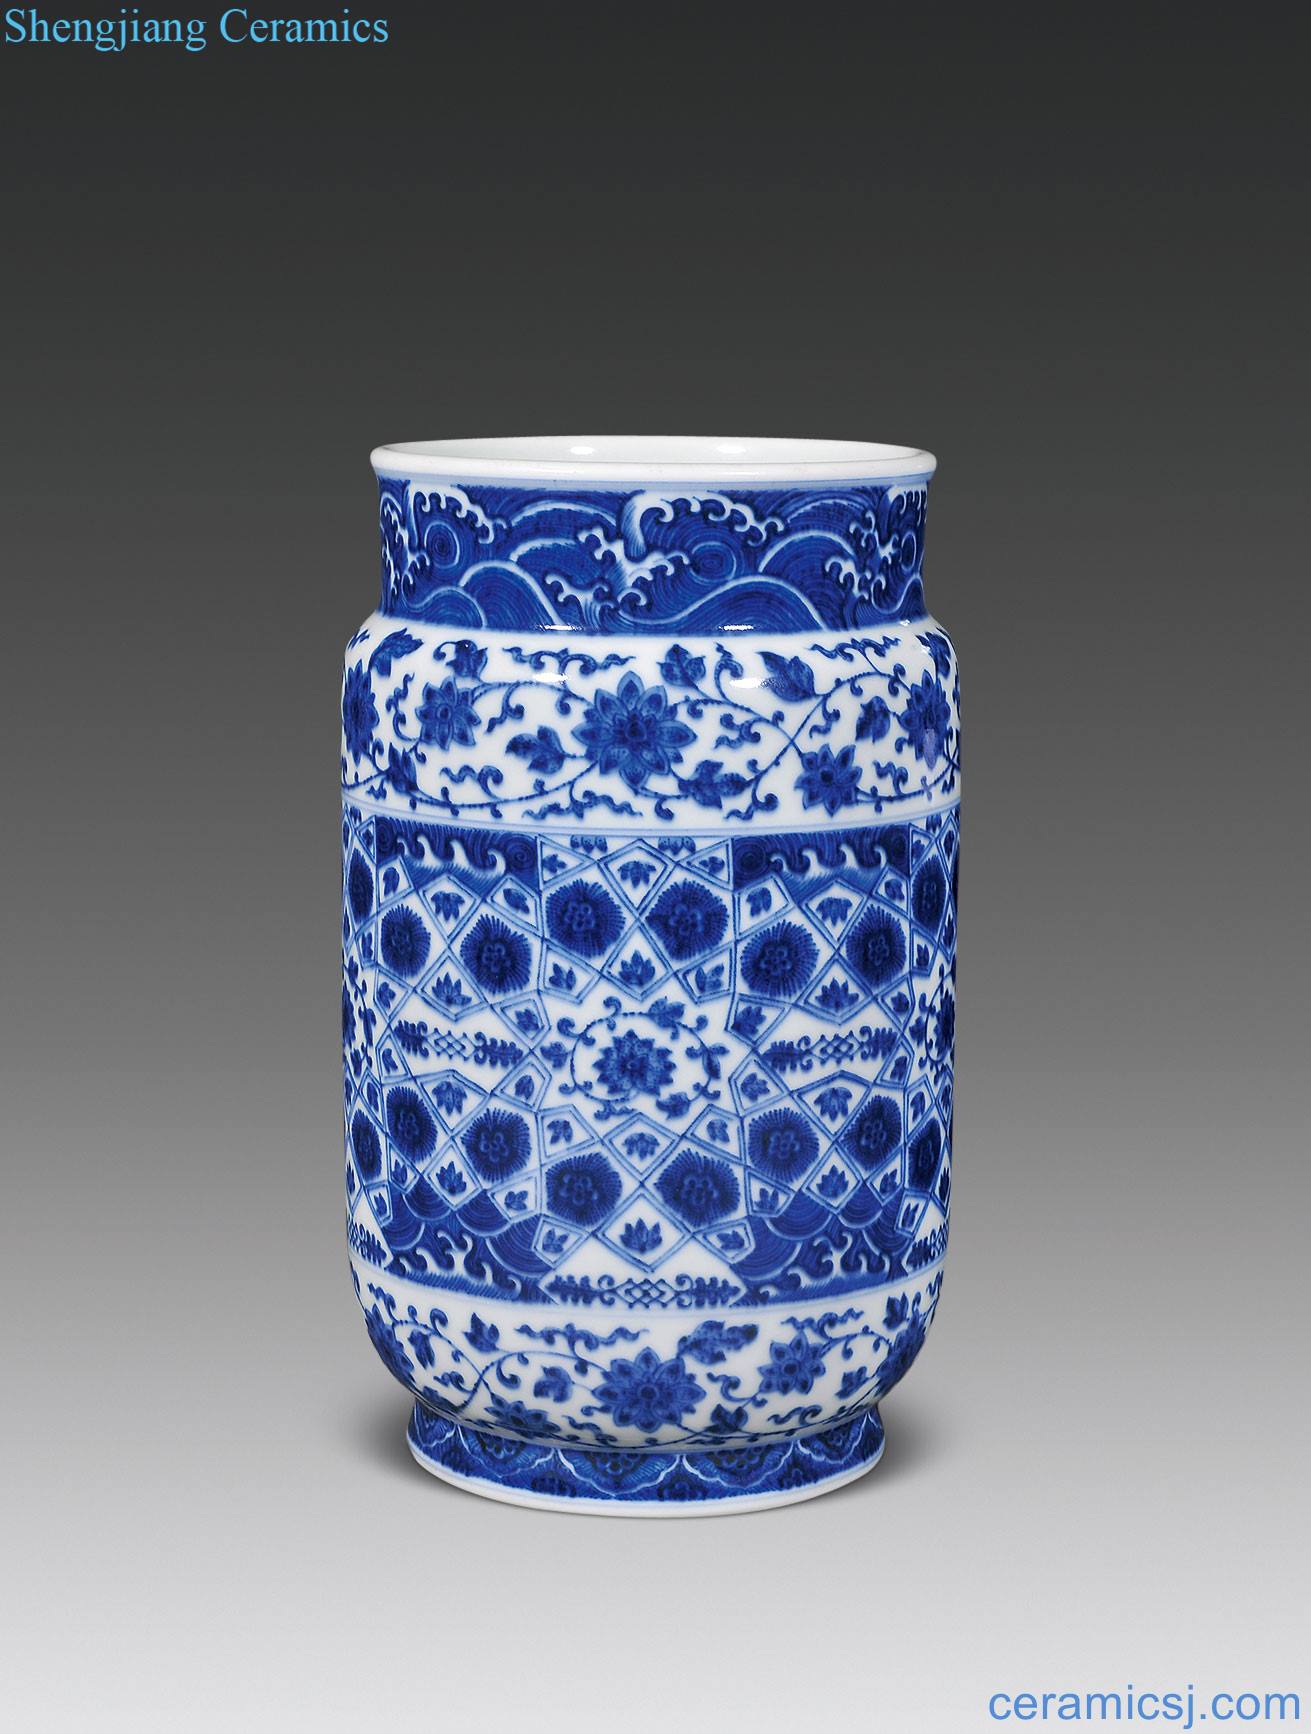 Qing dynasty blue and white flowers wen zhuang pot